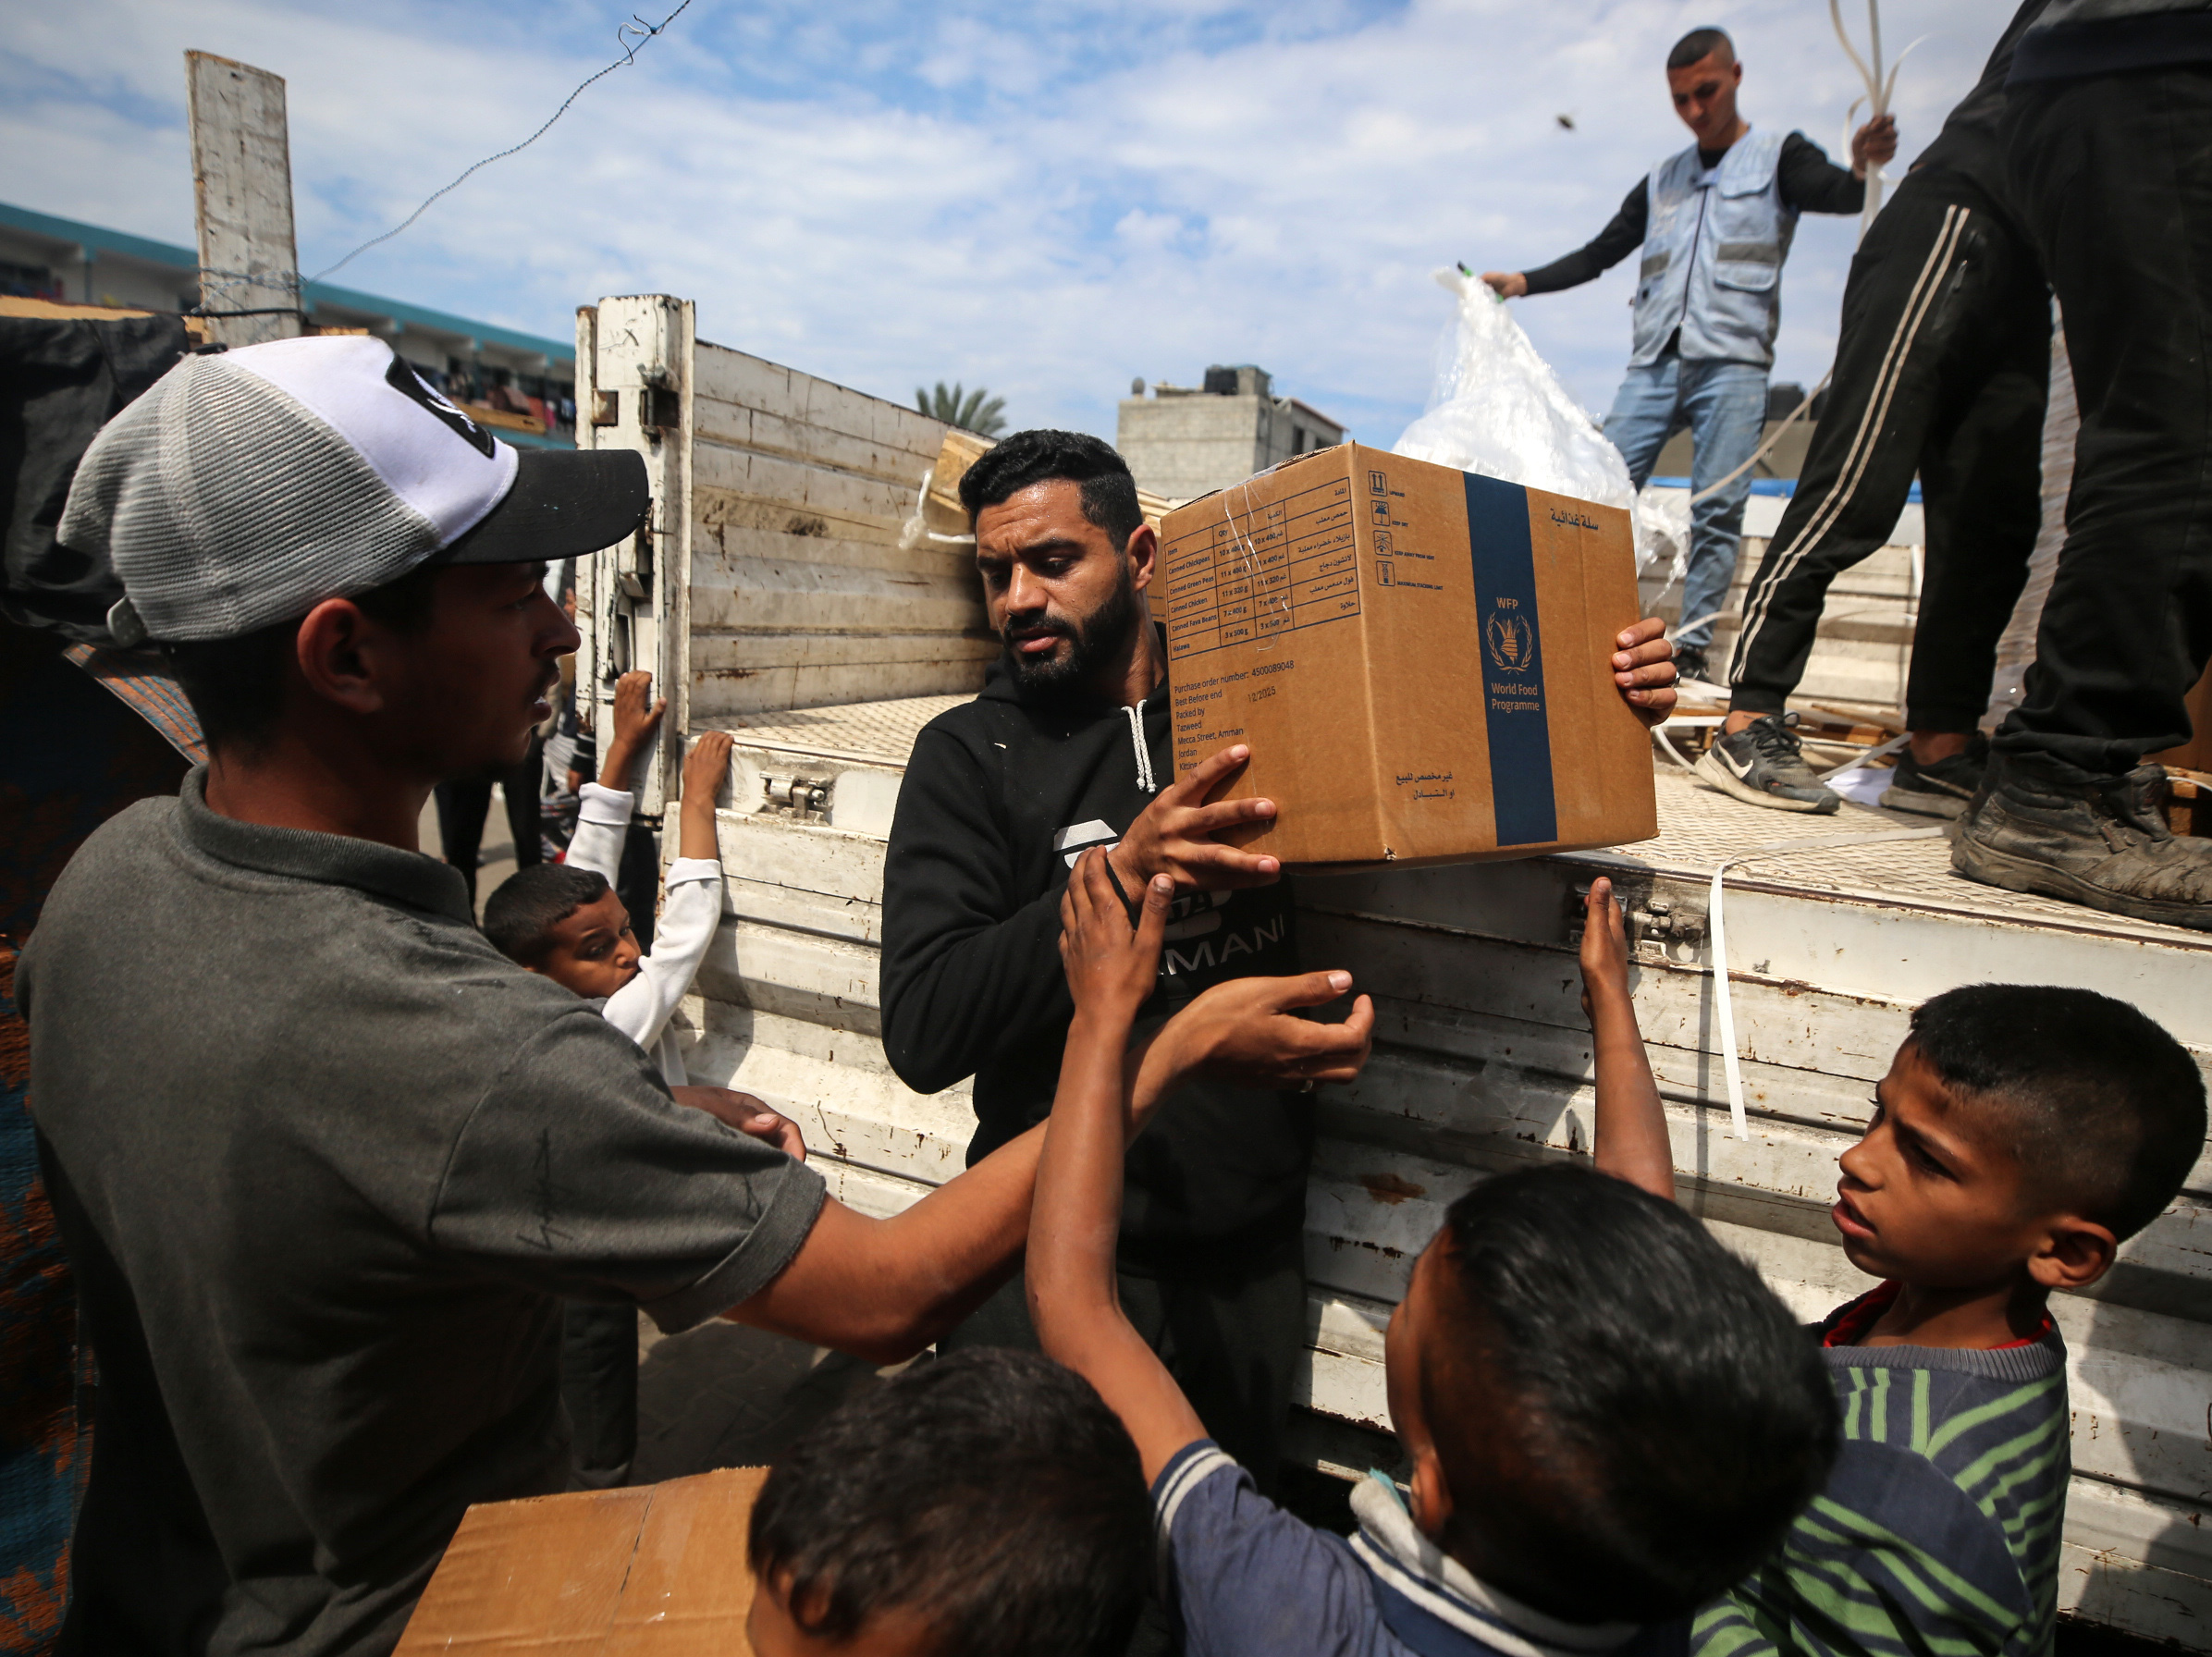 A Palestinian is carrying boxes of aid distributed before the Eid al-Fitr holiday, which marks the end of the Muslim holy fasting month of Ramadan, amid the ongoing conflict between Israel and Hamas, in Deir al-Balah, in the central Gaza Strip, on Monday.